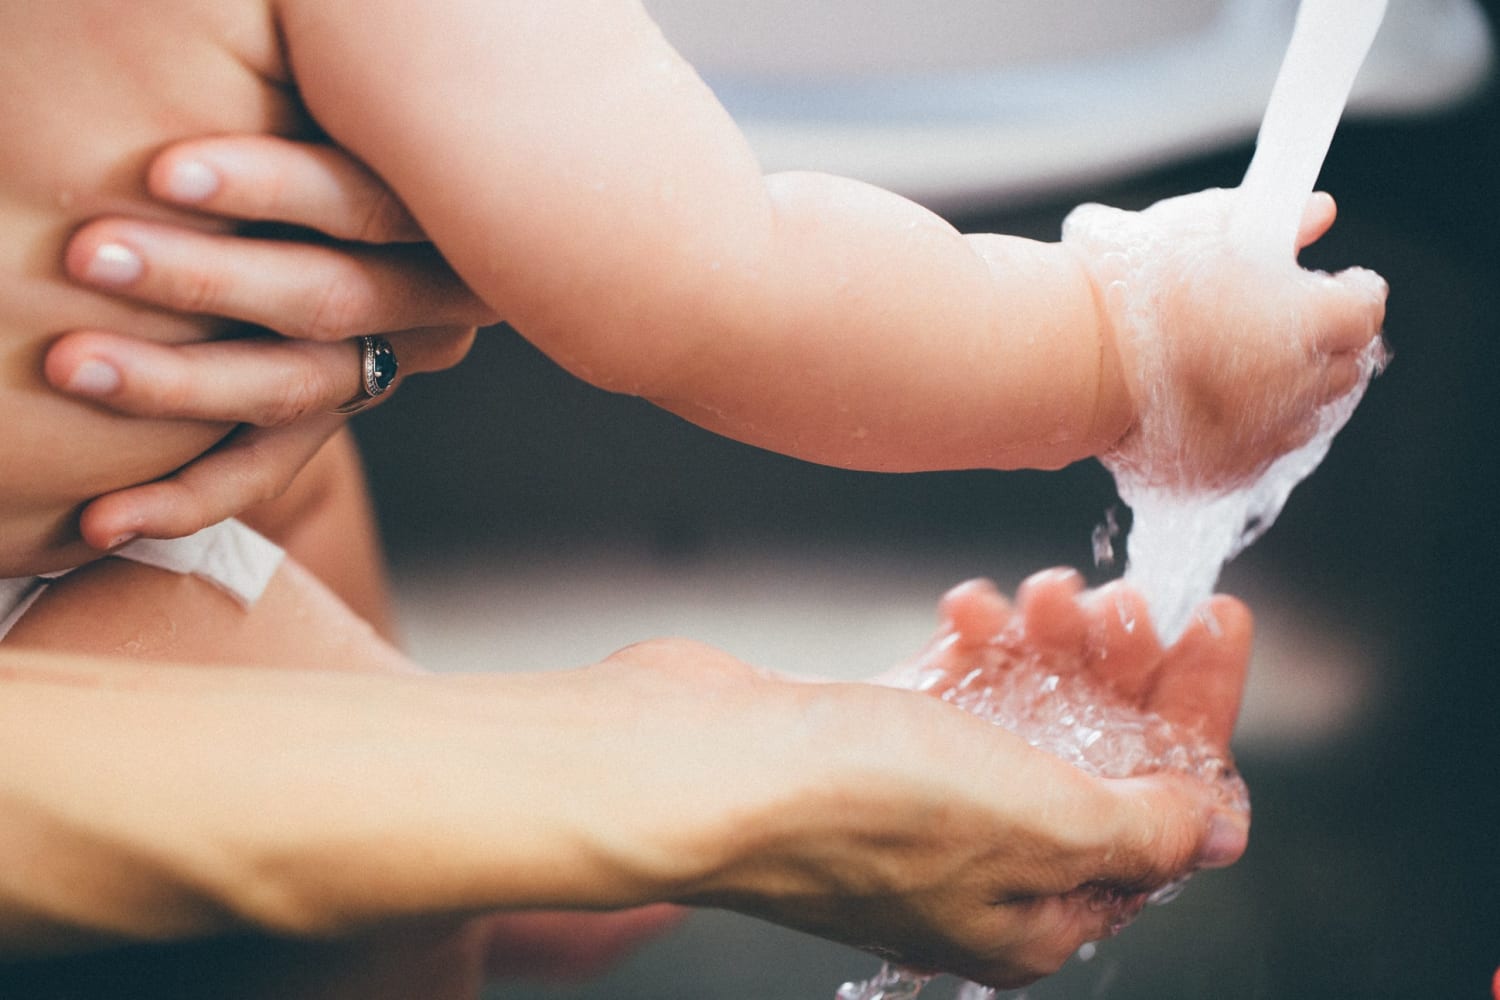 The Hand Washing Trick That Can Help Protect Your Kids Against Coronavirus